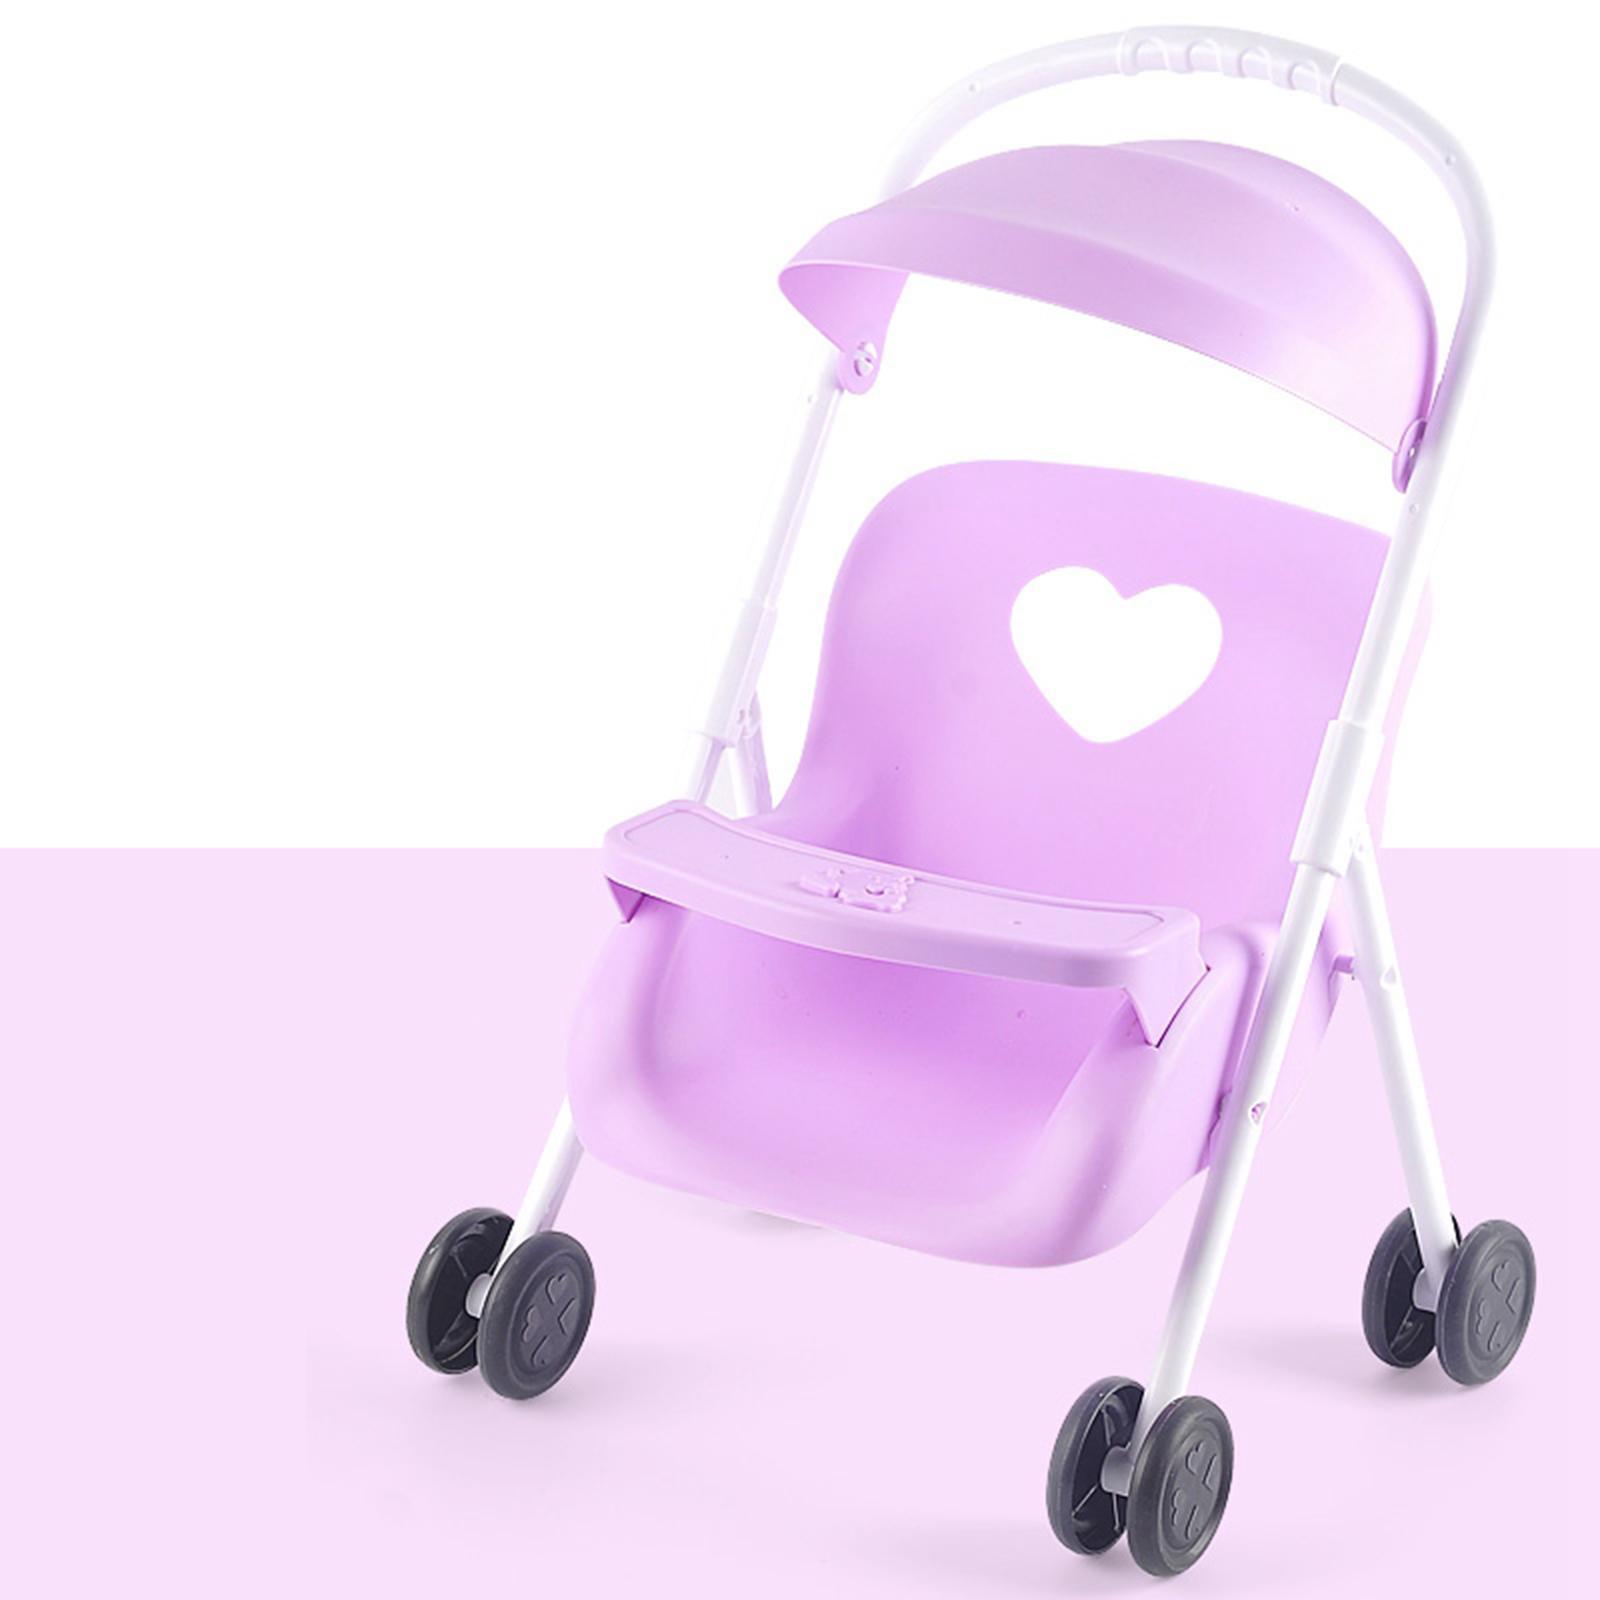 Dolls  Doll with Mini Stroller Carriages for Children